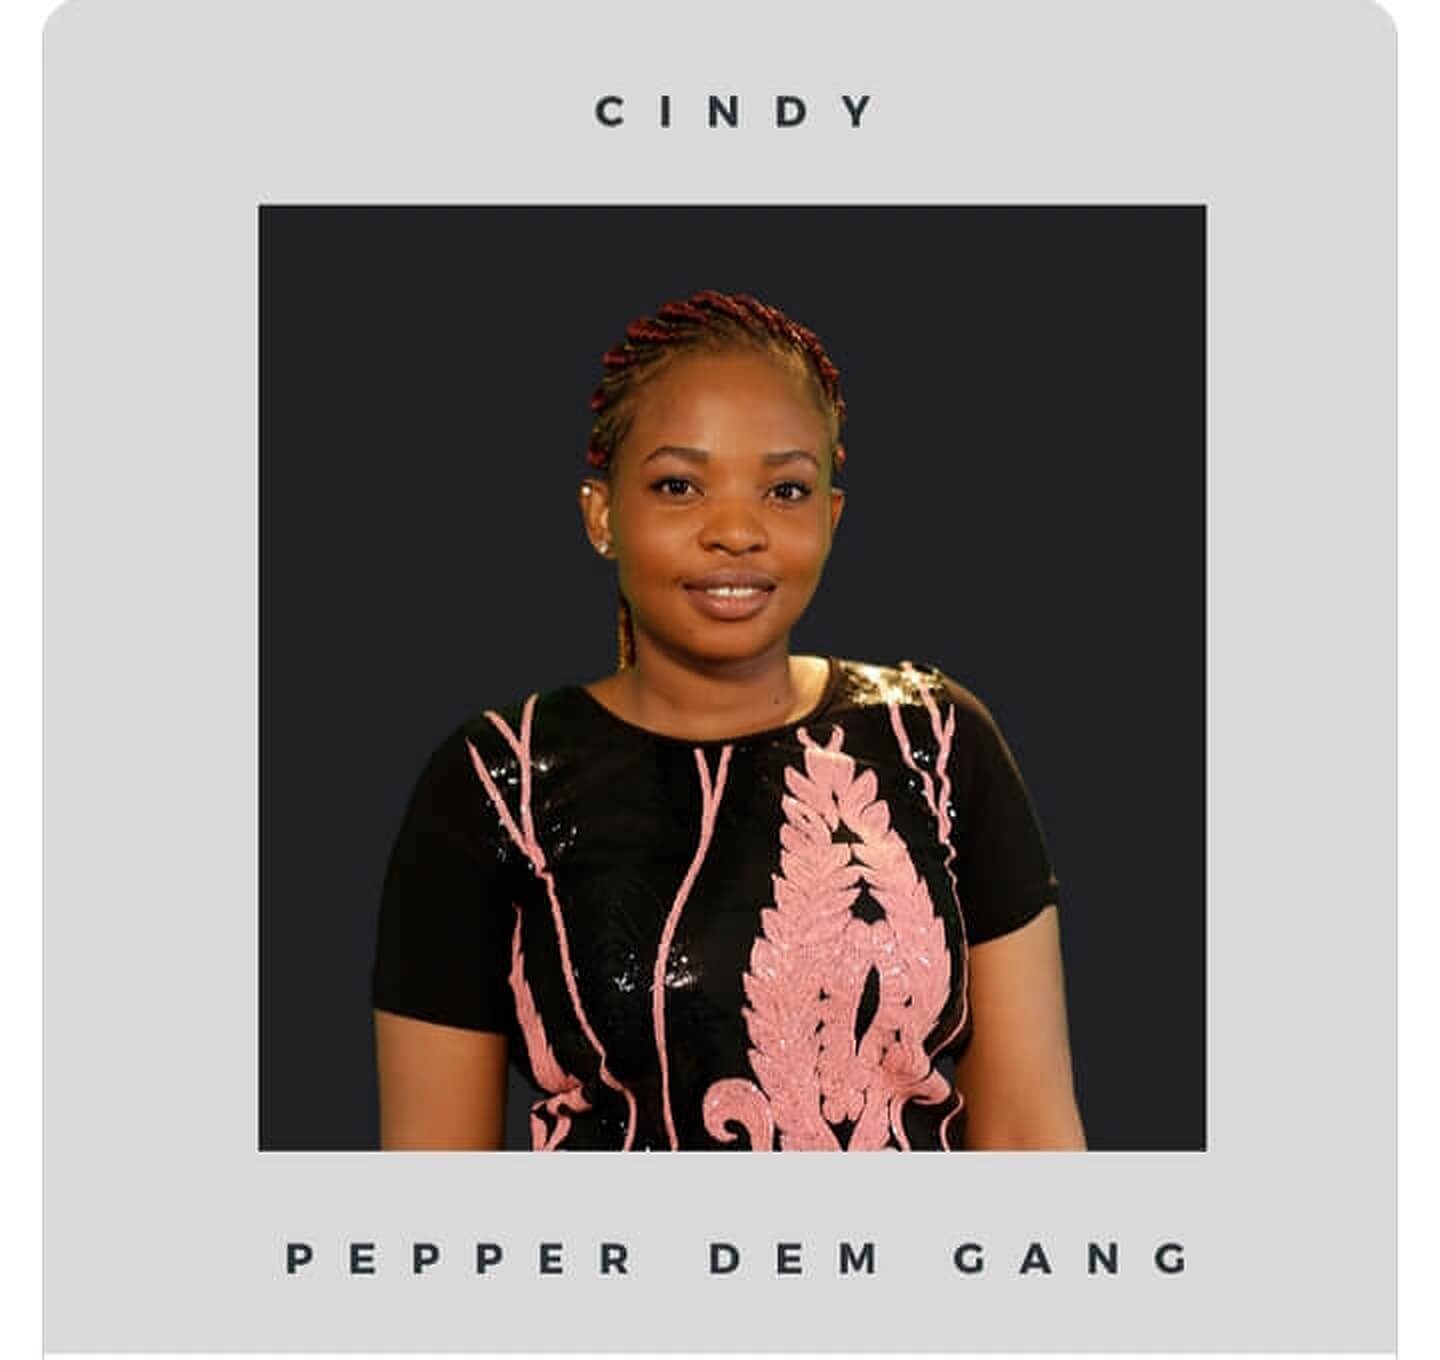 BBNaija Surprise Eviction: Cindy Evicted